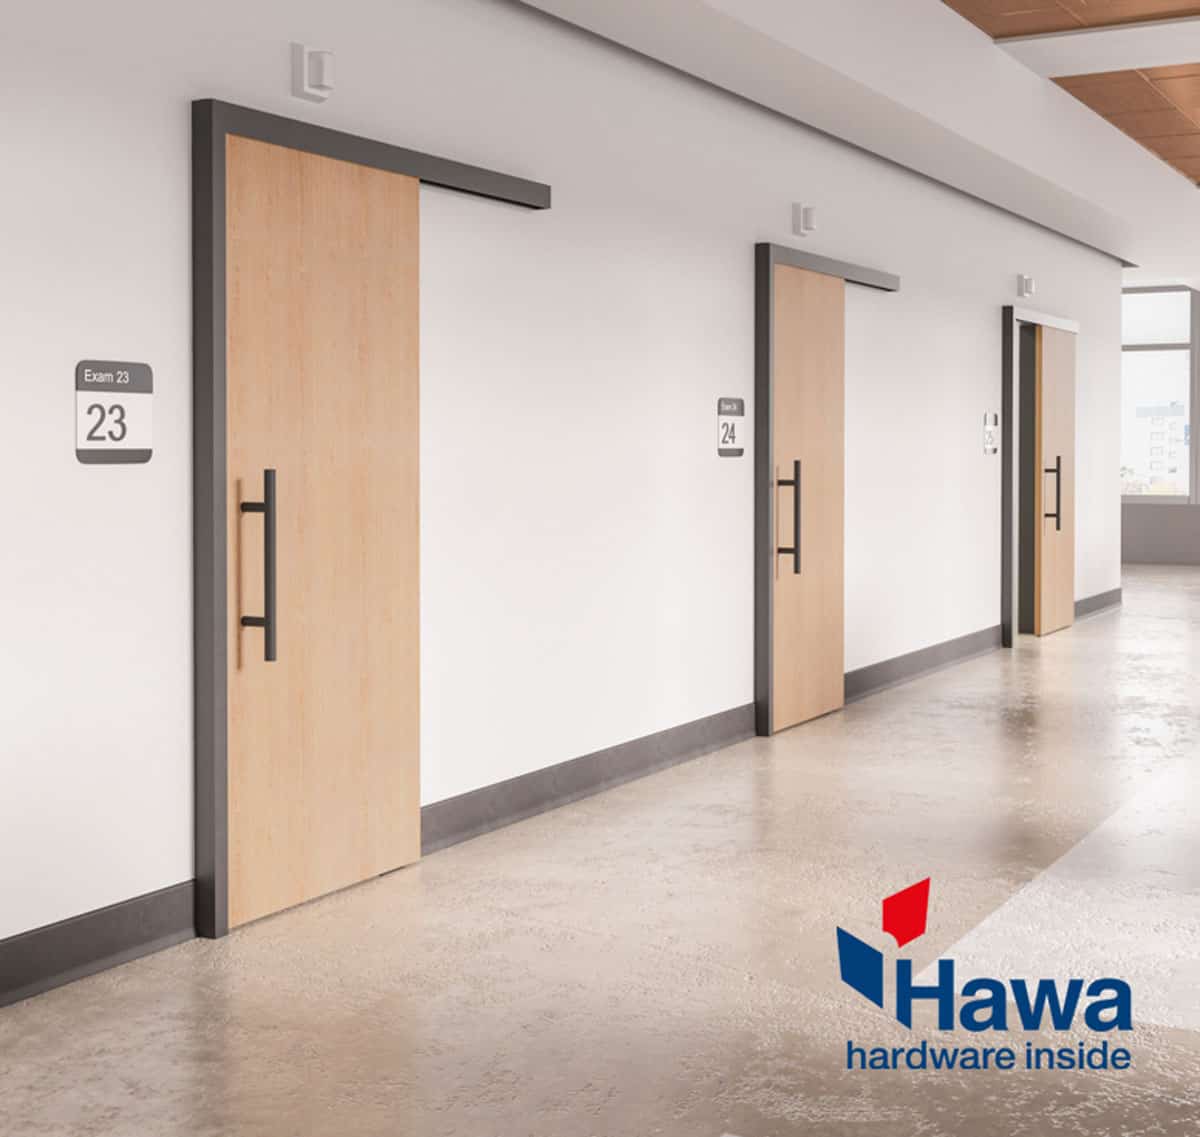 Modern office corridor with numbered wooden sliding doors featuring sleek handles and a commercial sliding door system, alongside a company logo on the wall.